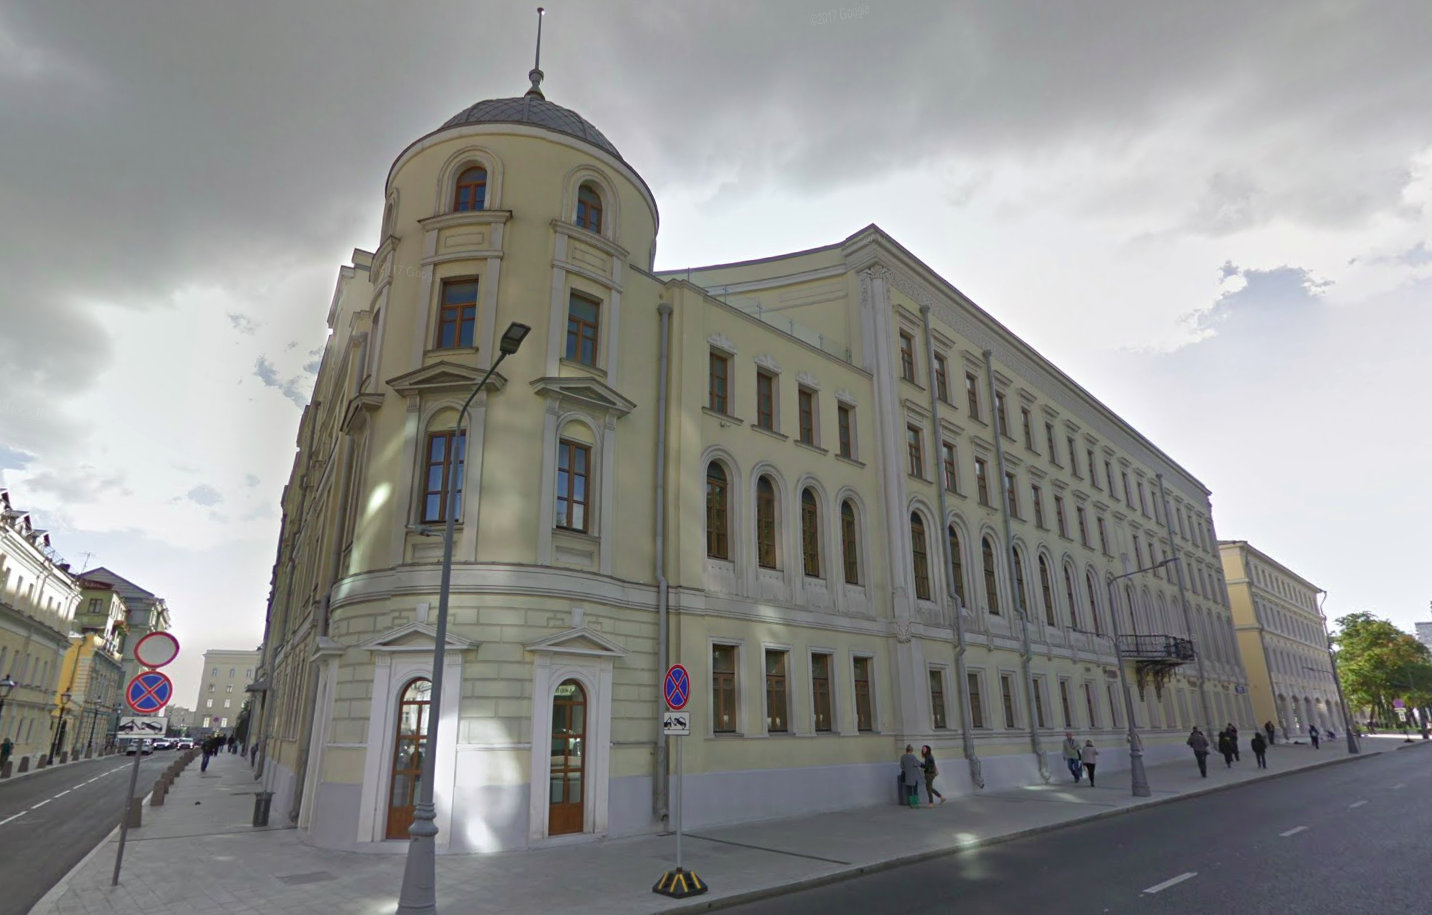 A historic mansion on Moscow’s Vozdvizhenka Street belonging to the Center for the Development of Interpersonal Communication. Credit: Google Street View